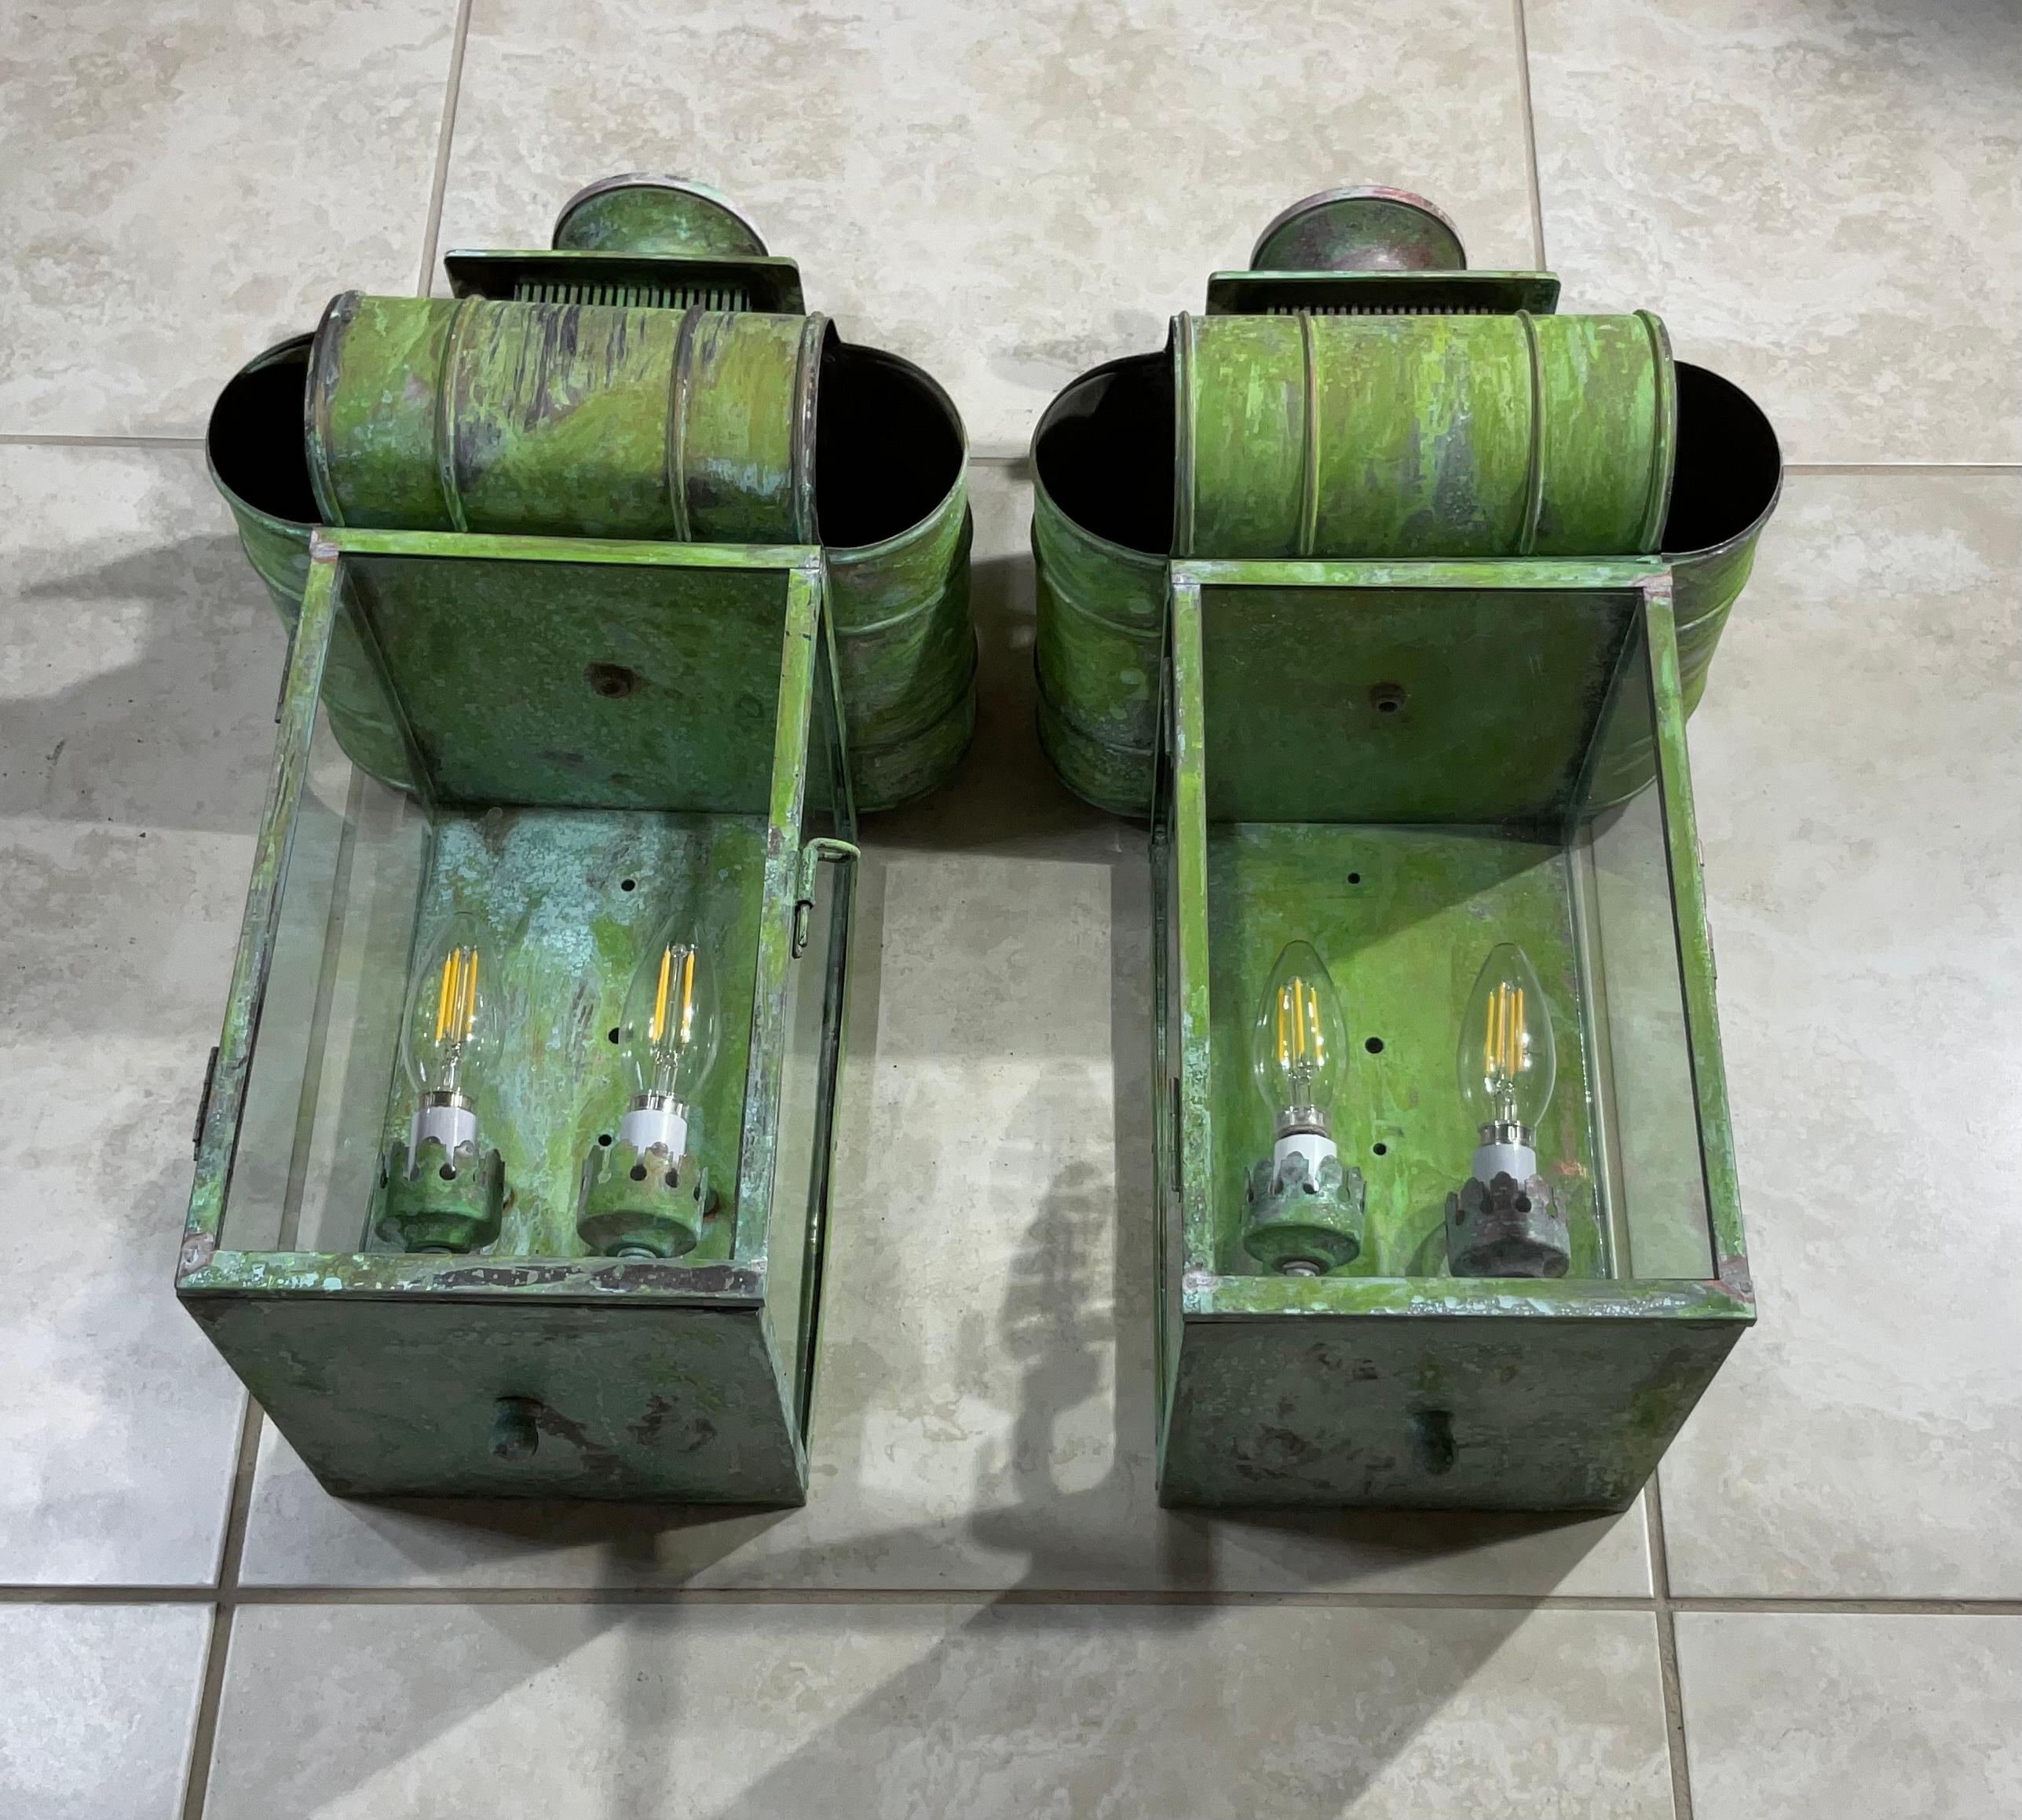 American Classical Pair of Large Vintage Architectural Wall Lantern